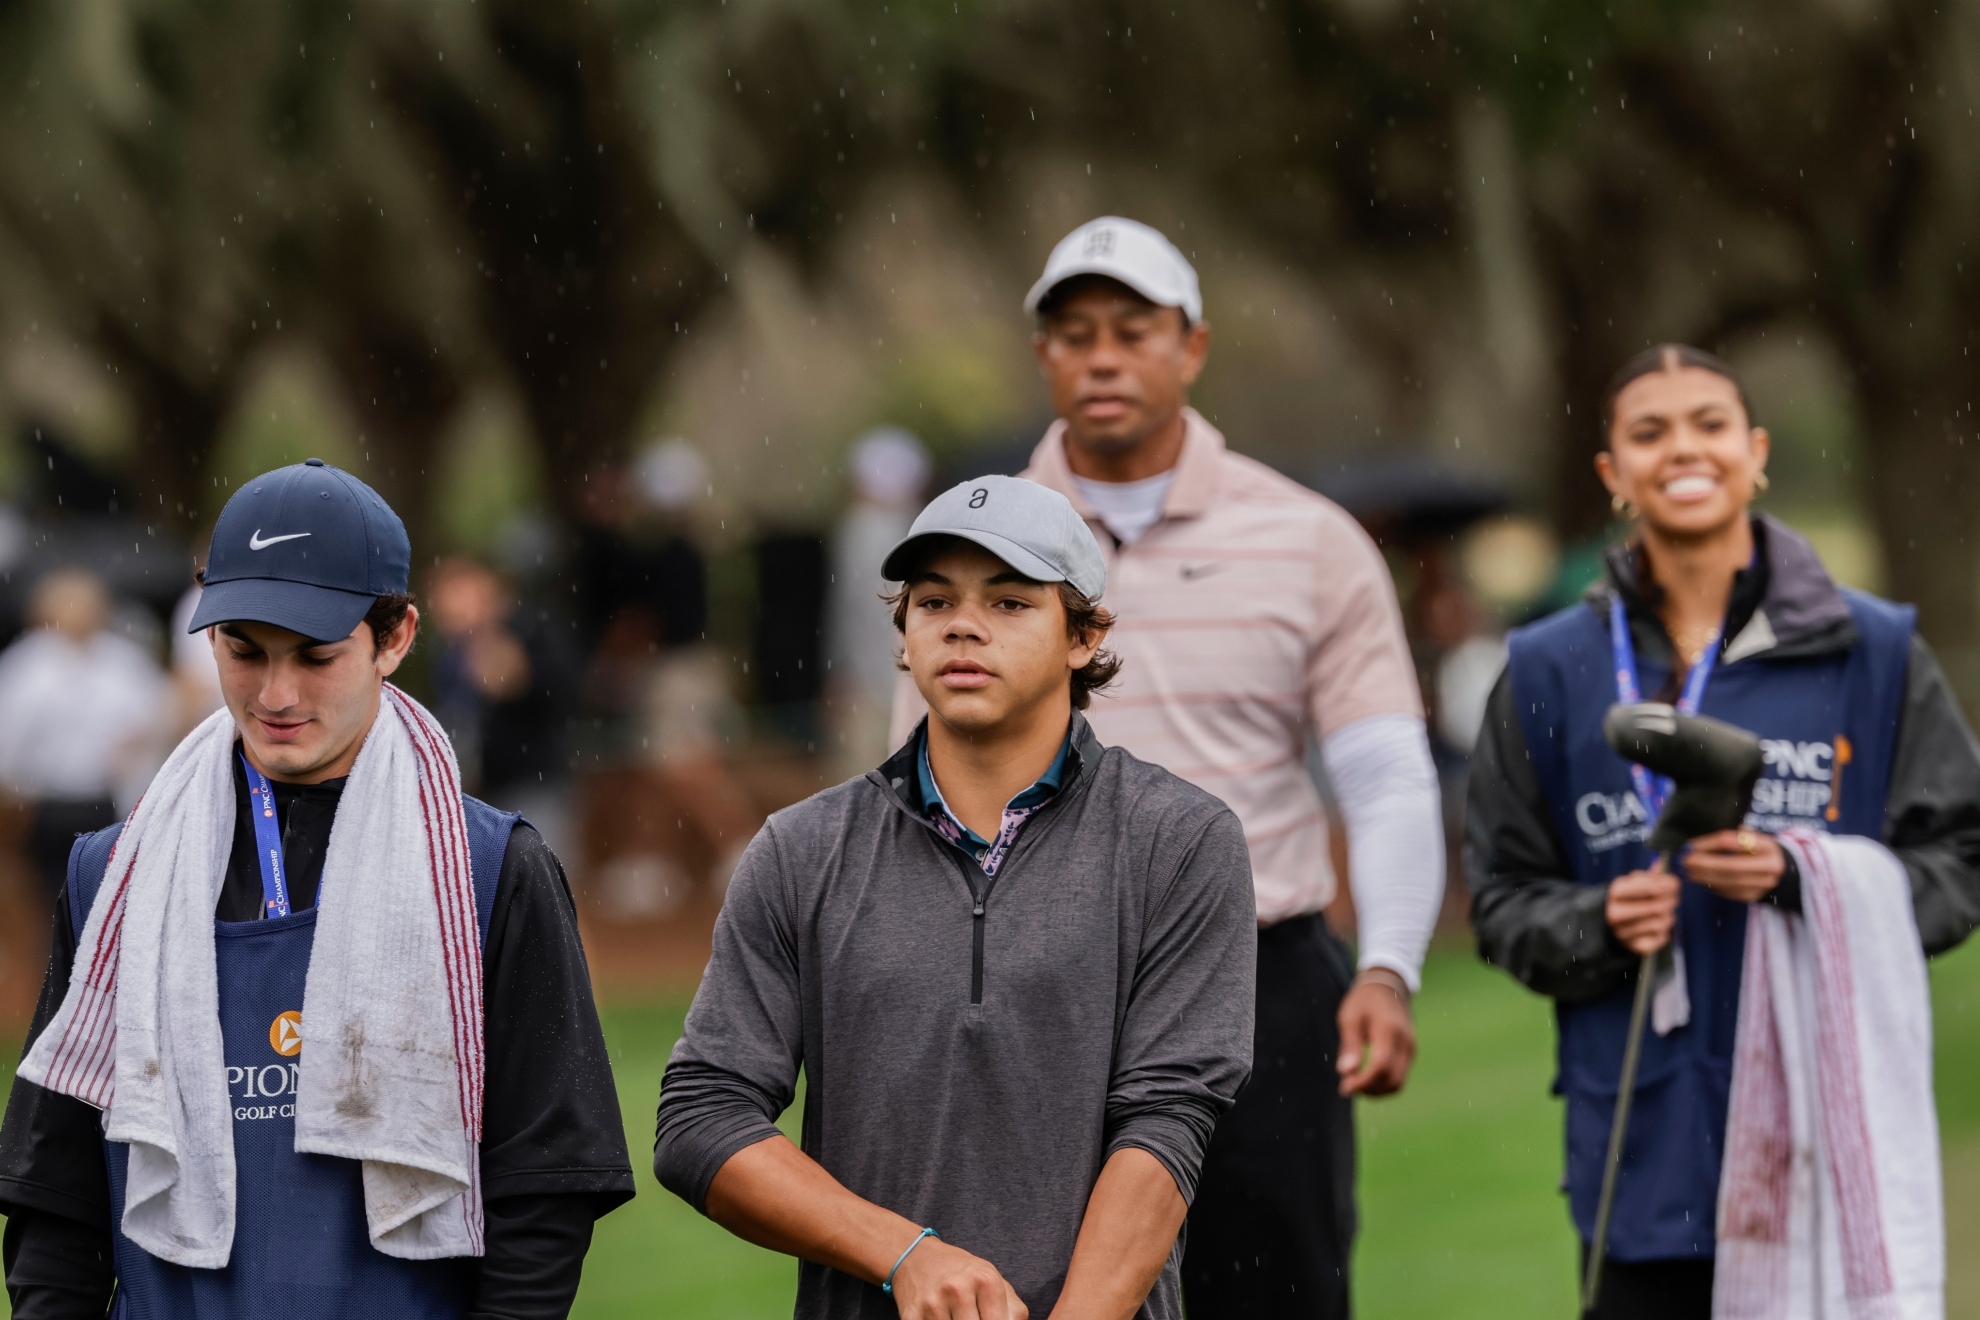 Tiger Woods watches his son Charlie compete